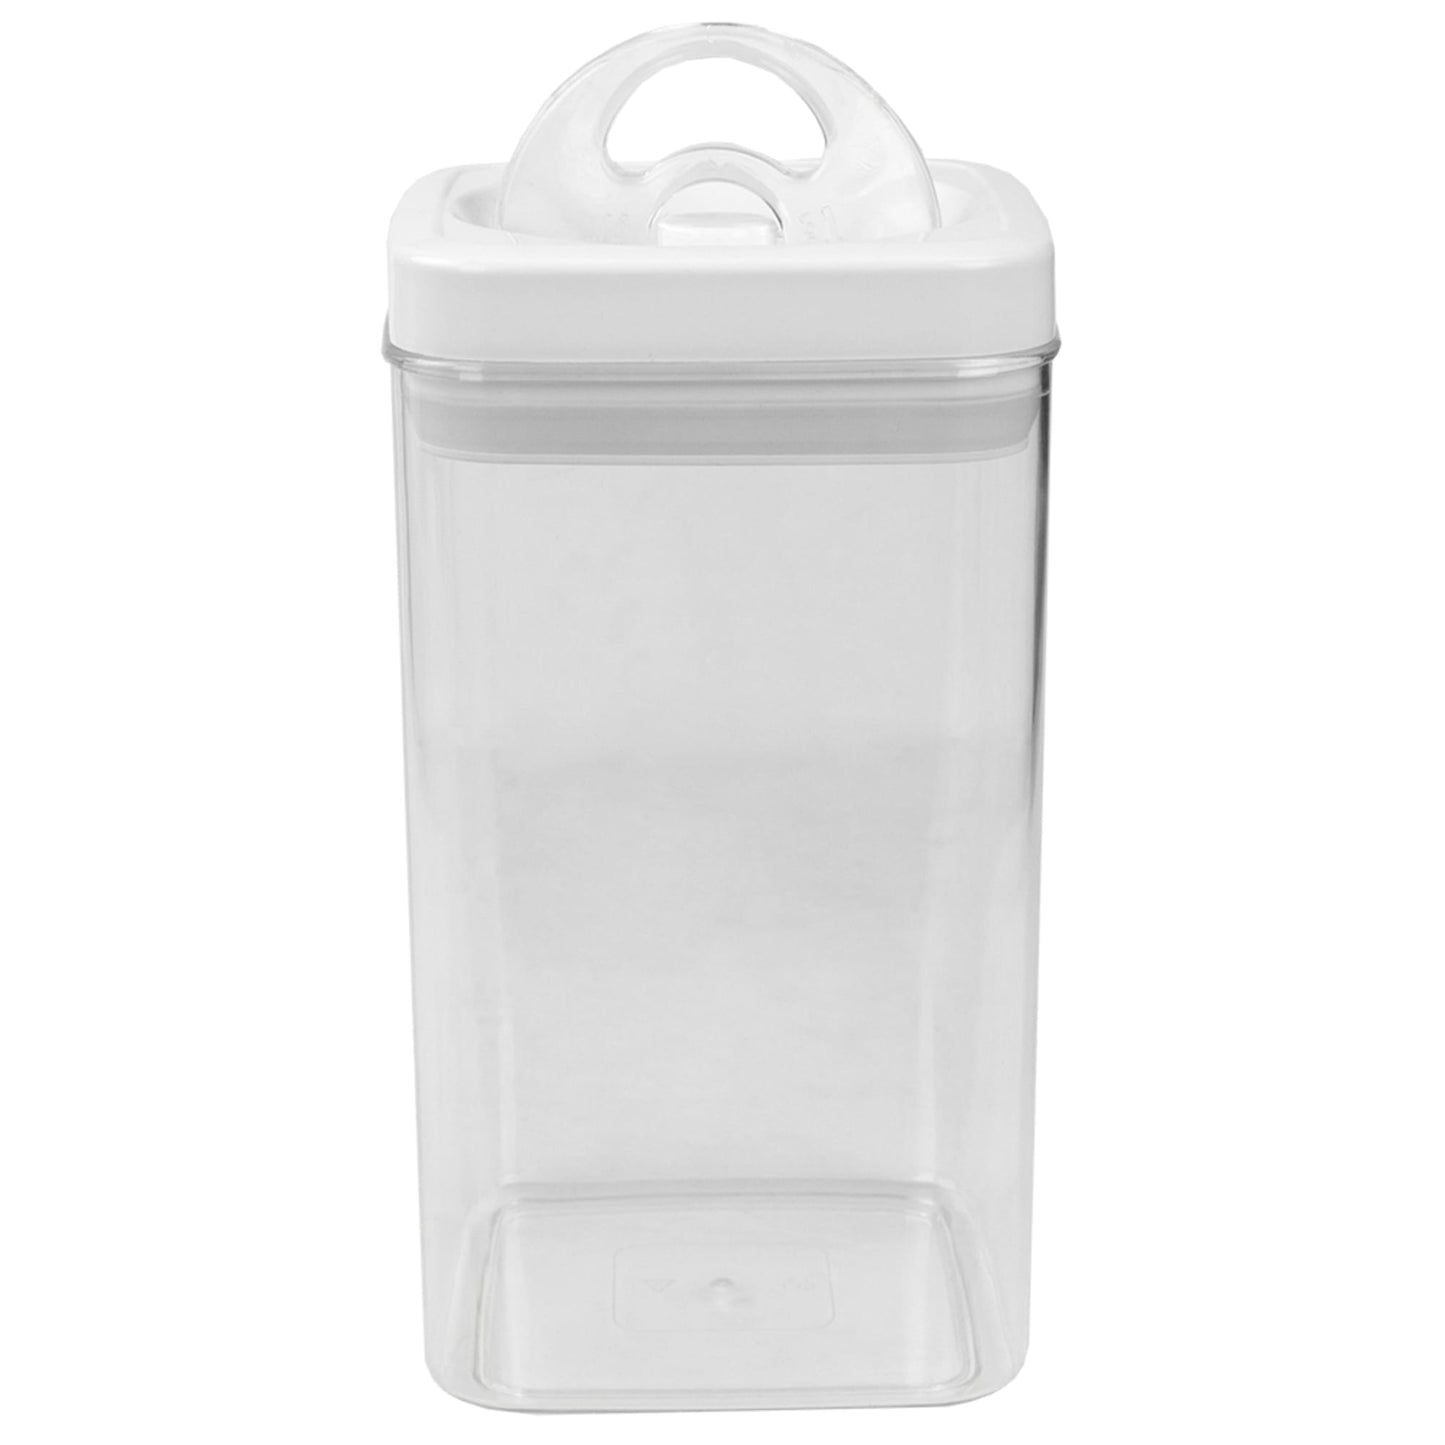 2.3 Liter Twist 'N Lock Air-Tight Square Plastic Canister, White